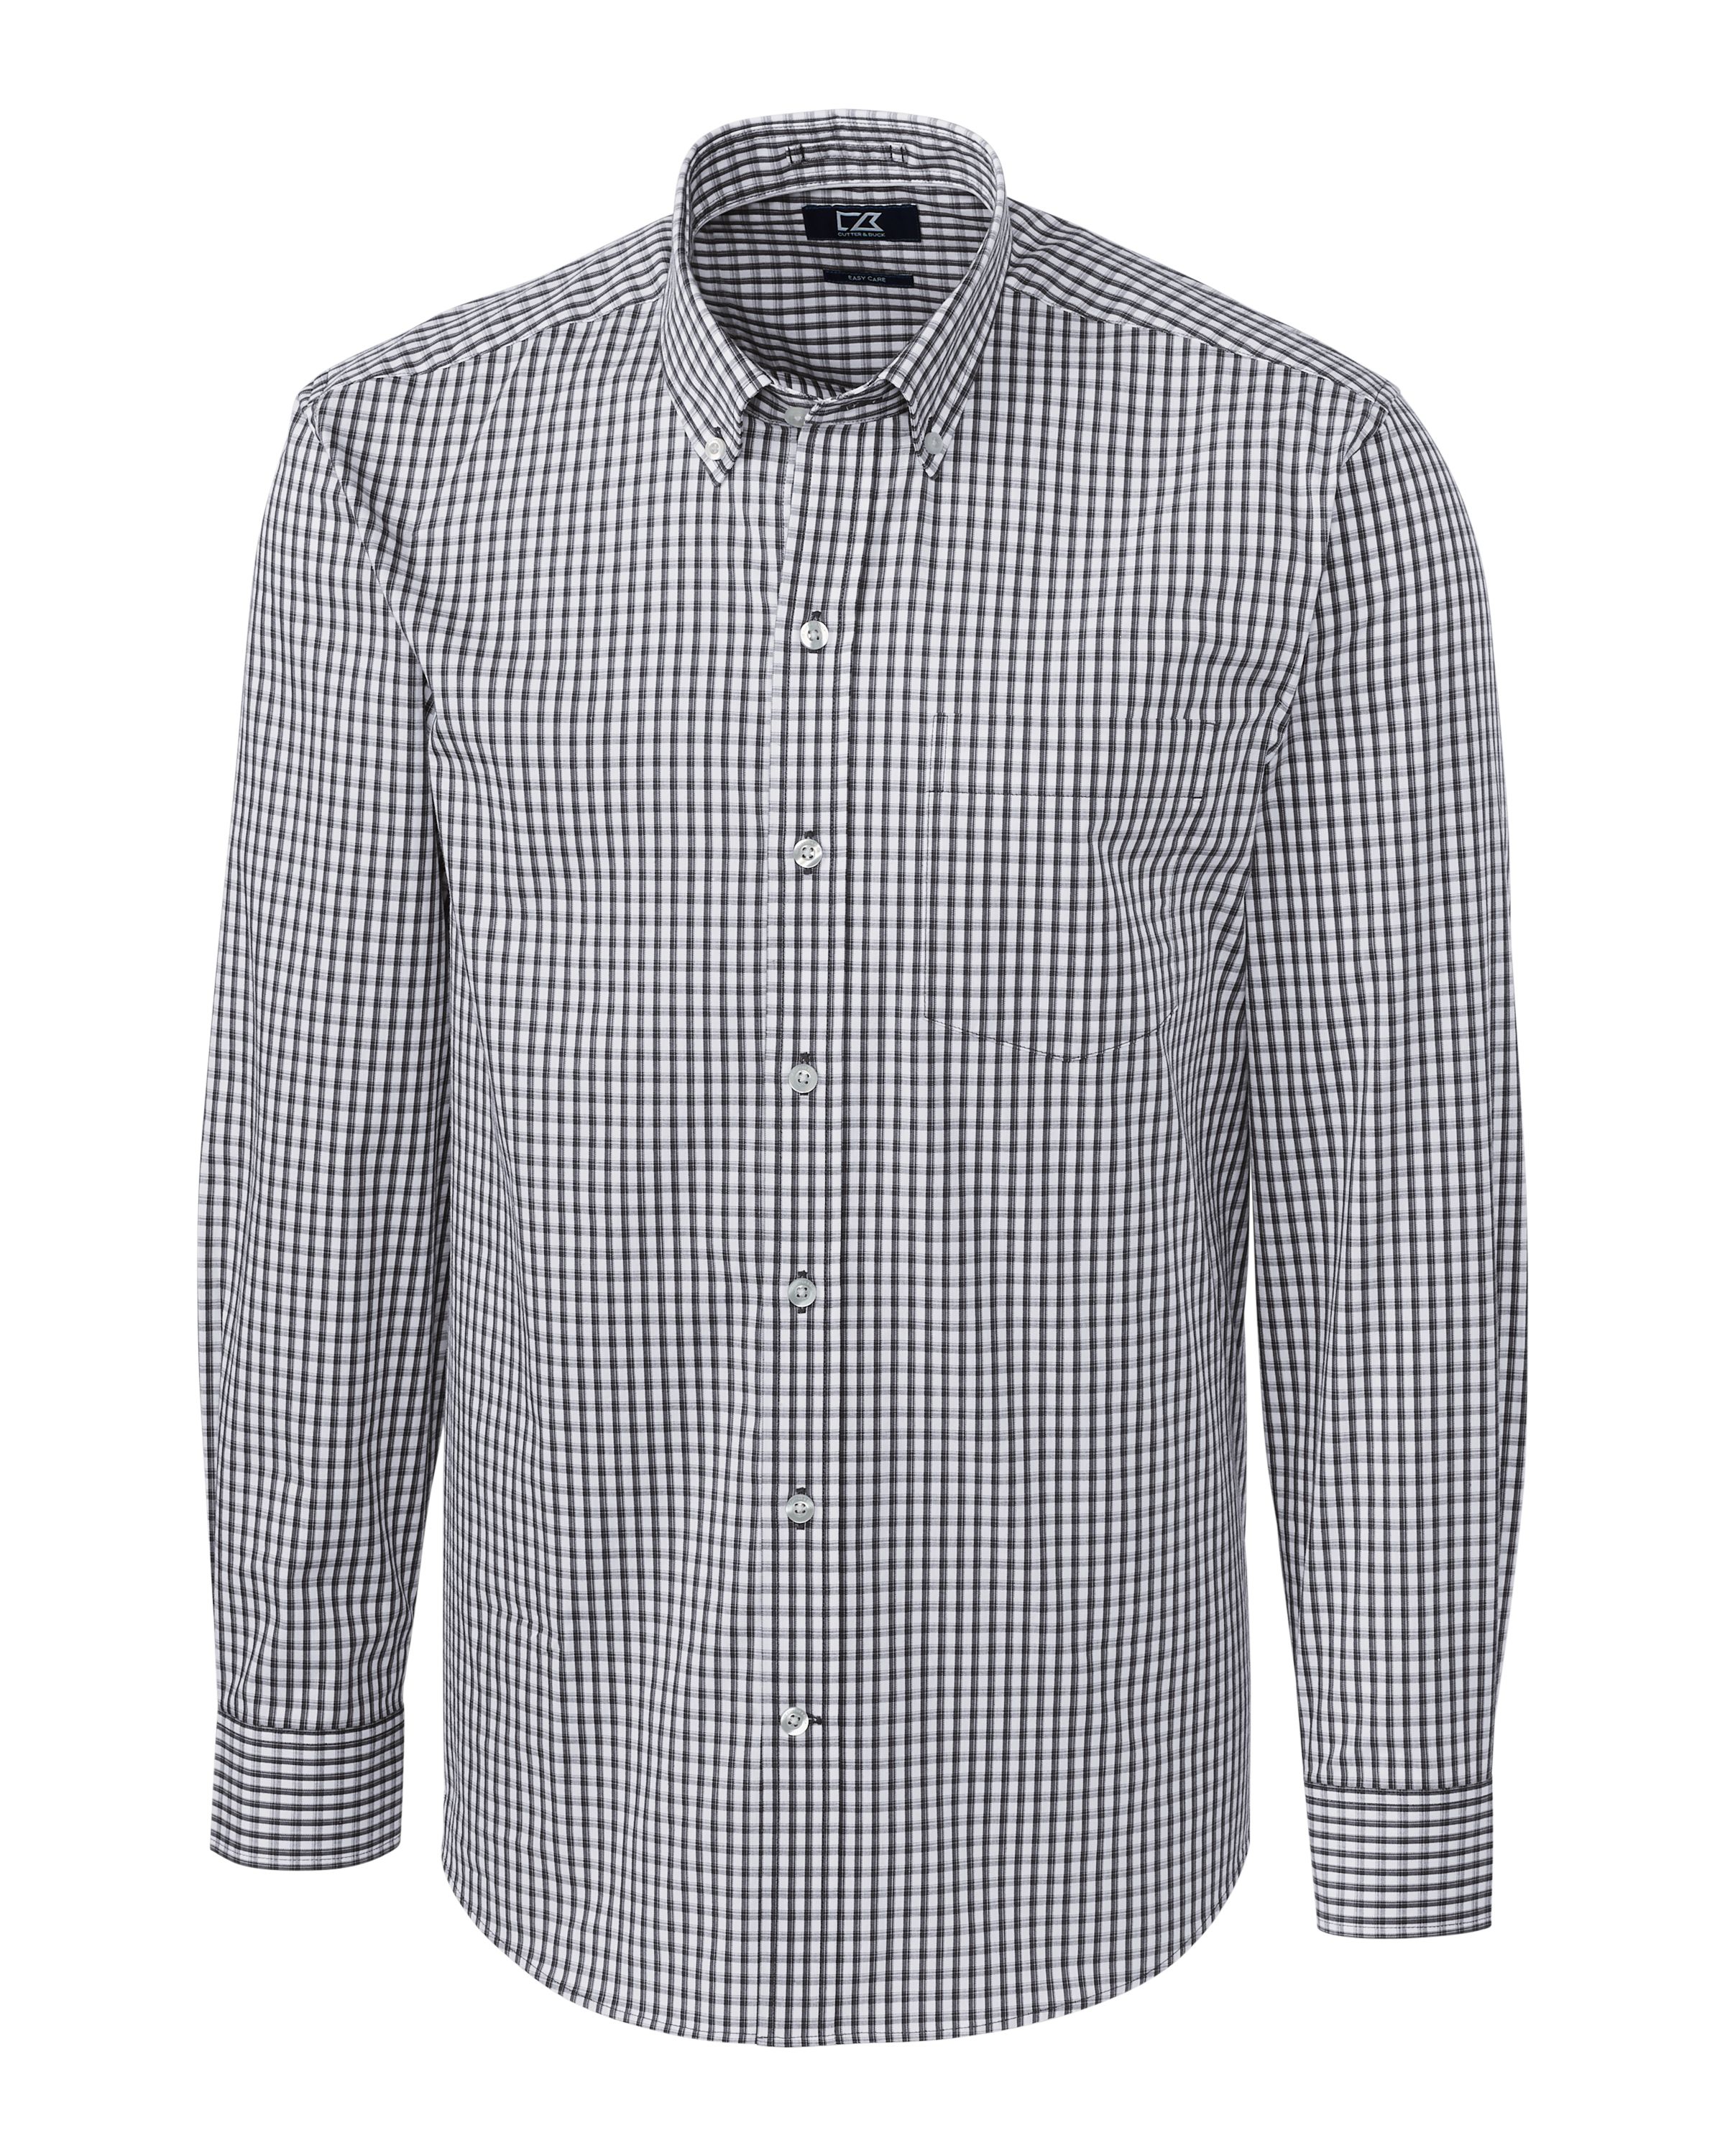 CB Easy Care Stretch Gingham Mens Big and Tall Long Sleeve Dress Shirt-